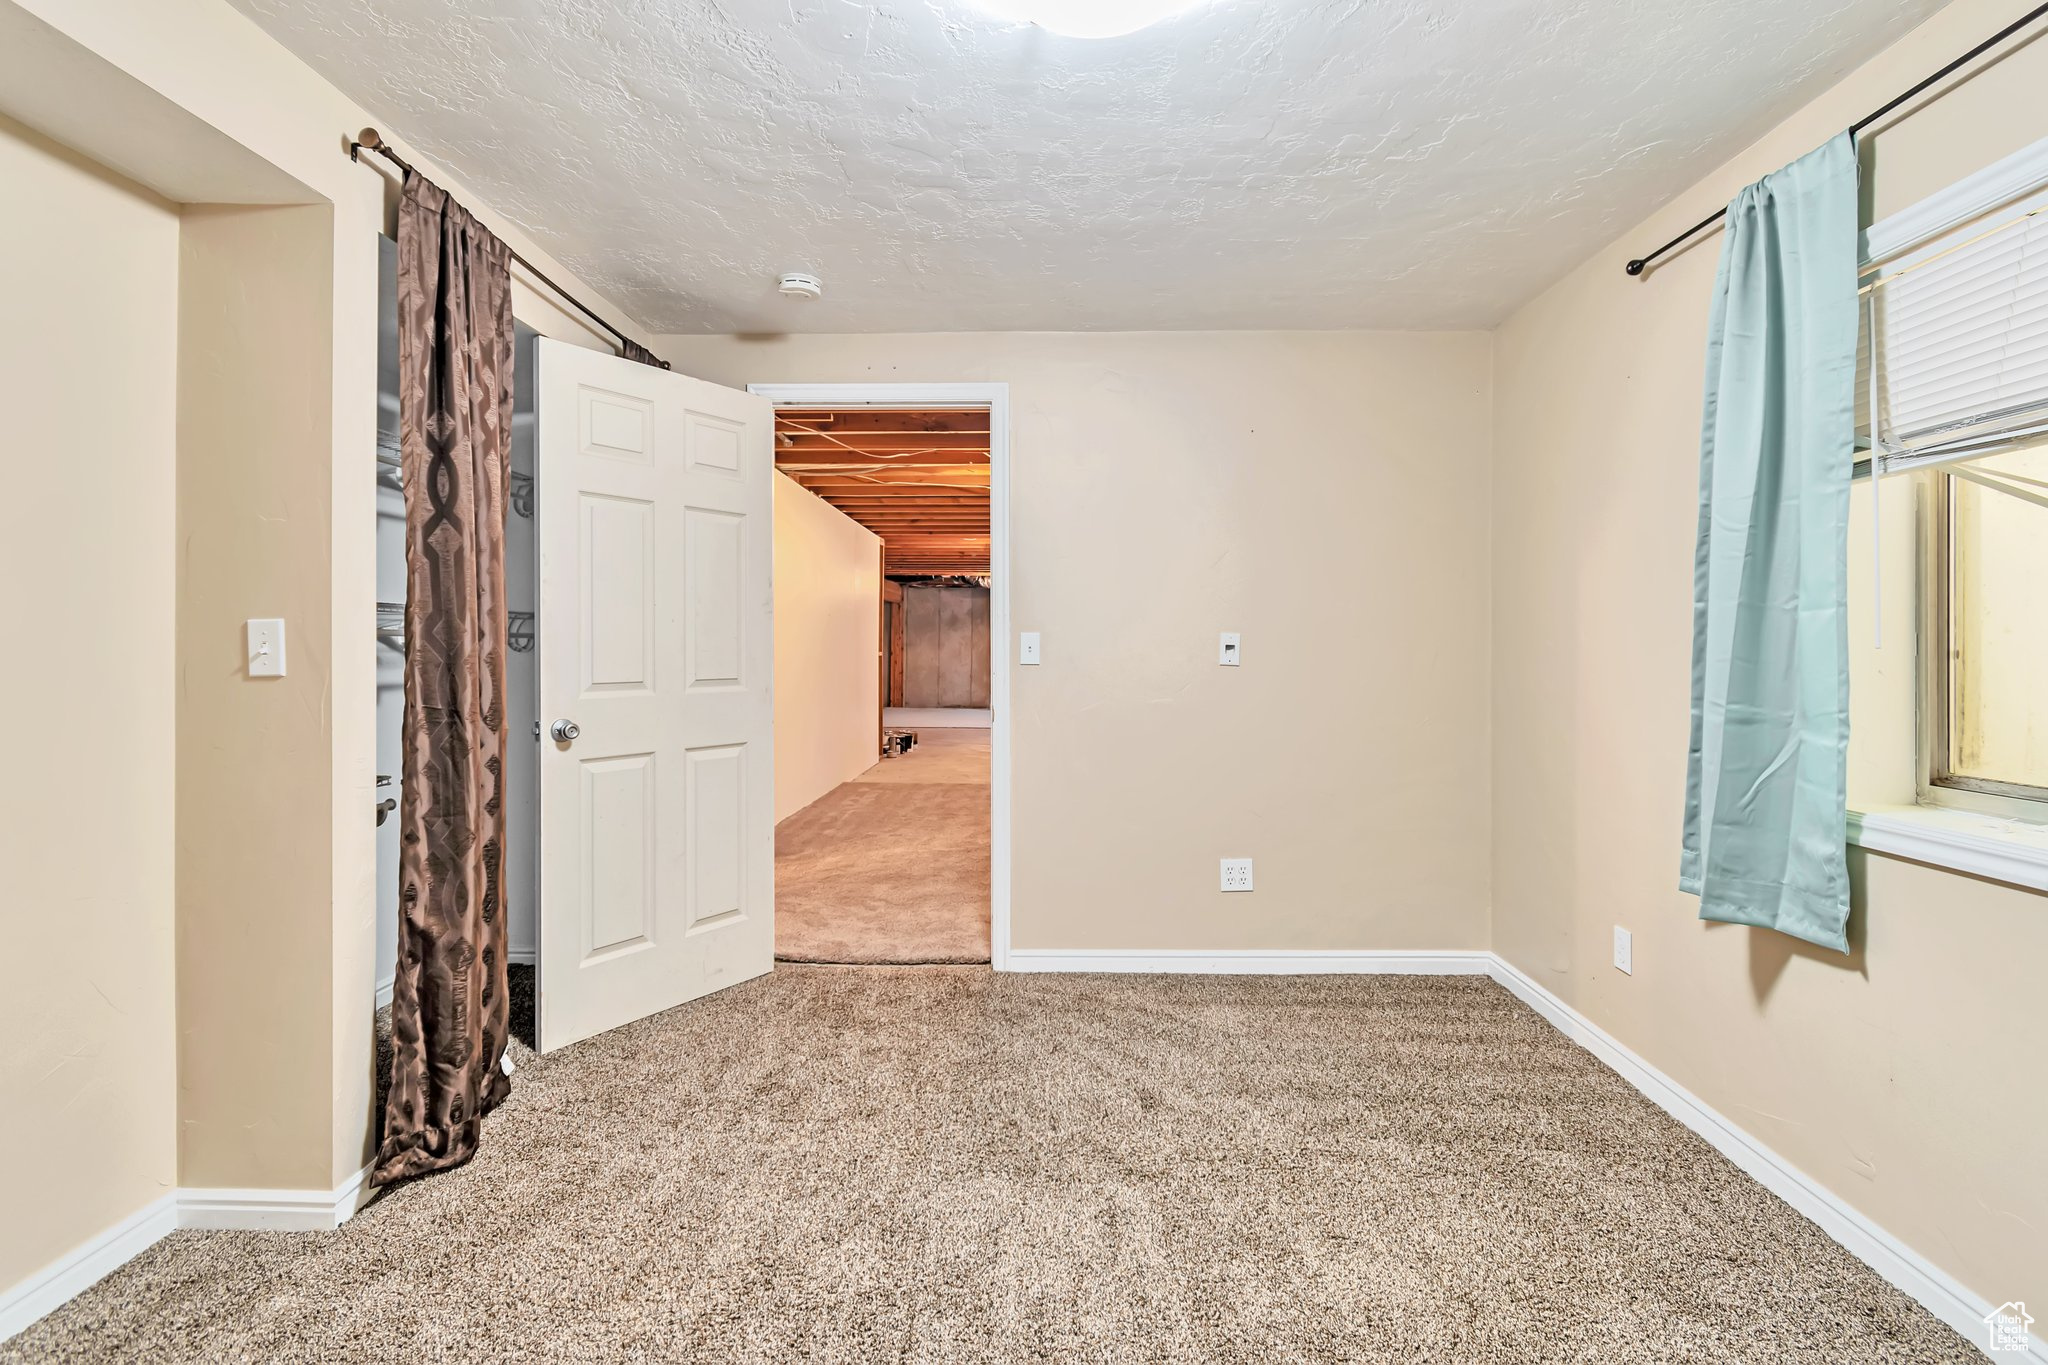 carpeted room with window, closet, and textured ceiling.